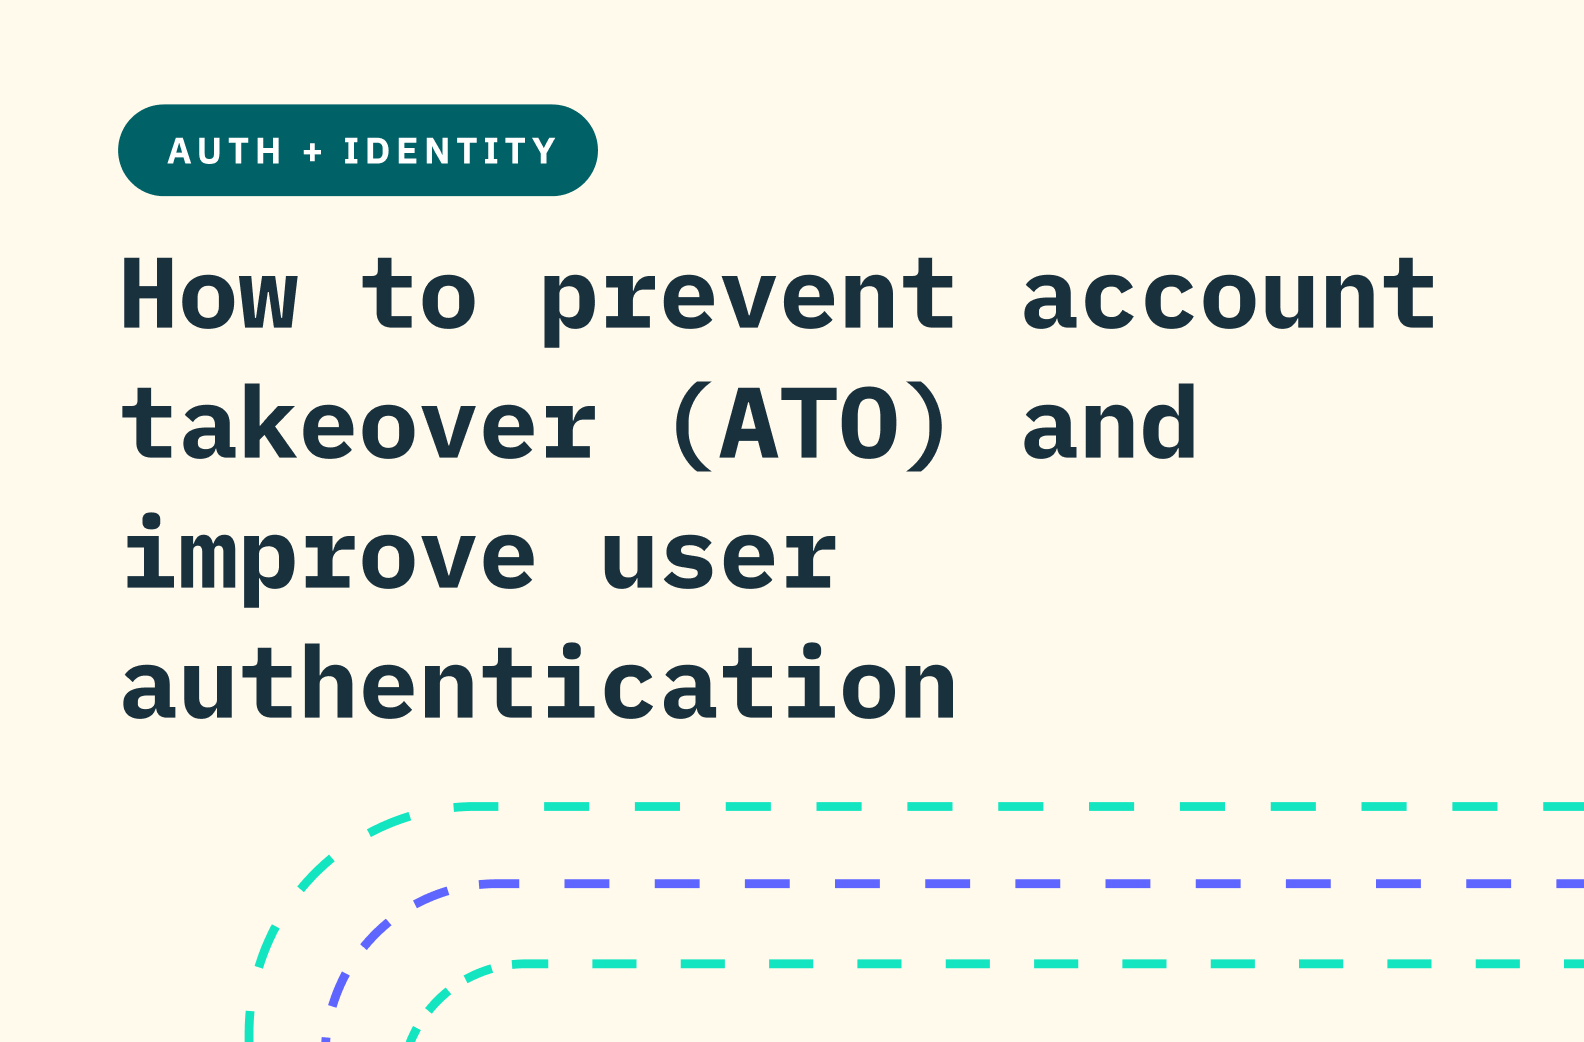 The text "How to prevent account takeover (ATO) and improve user authentication" on a light yellow background